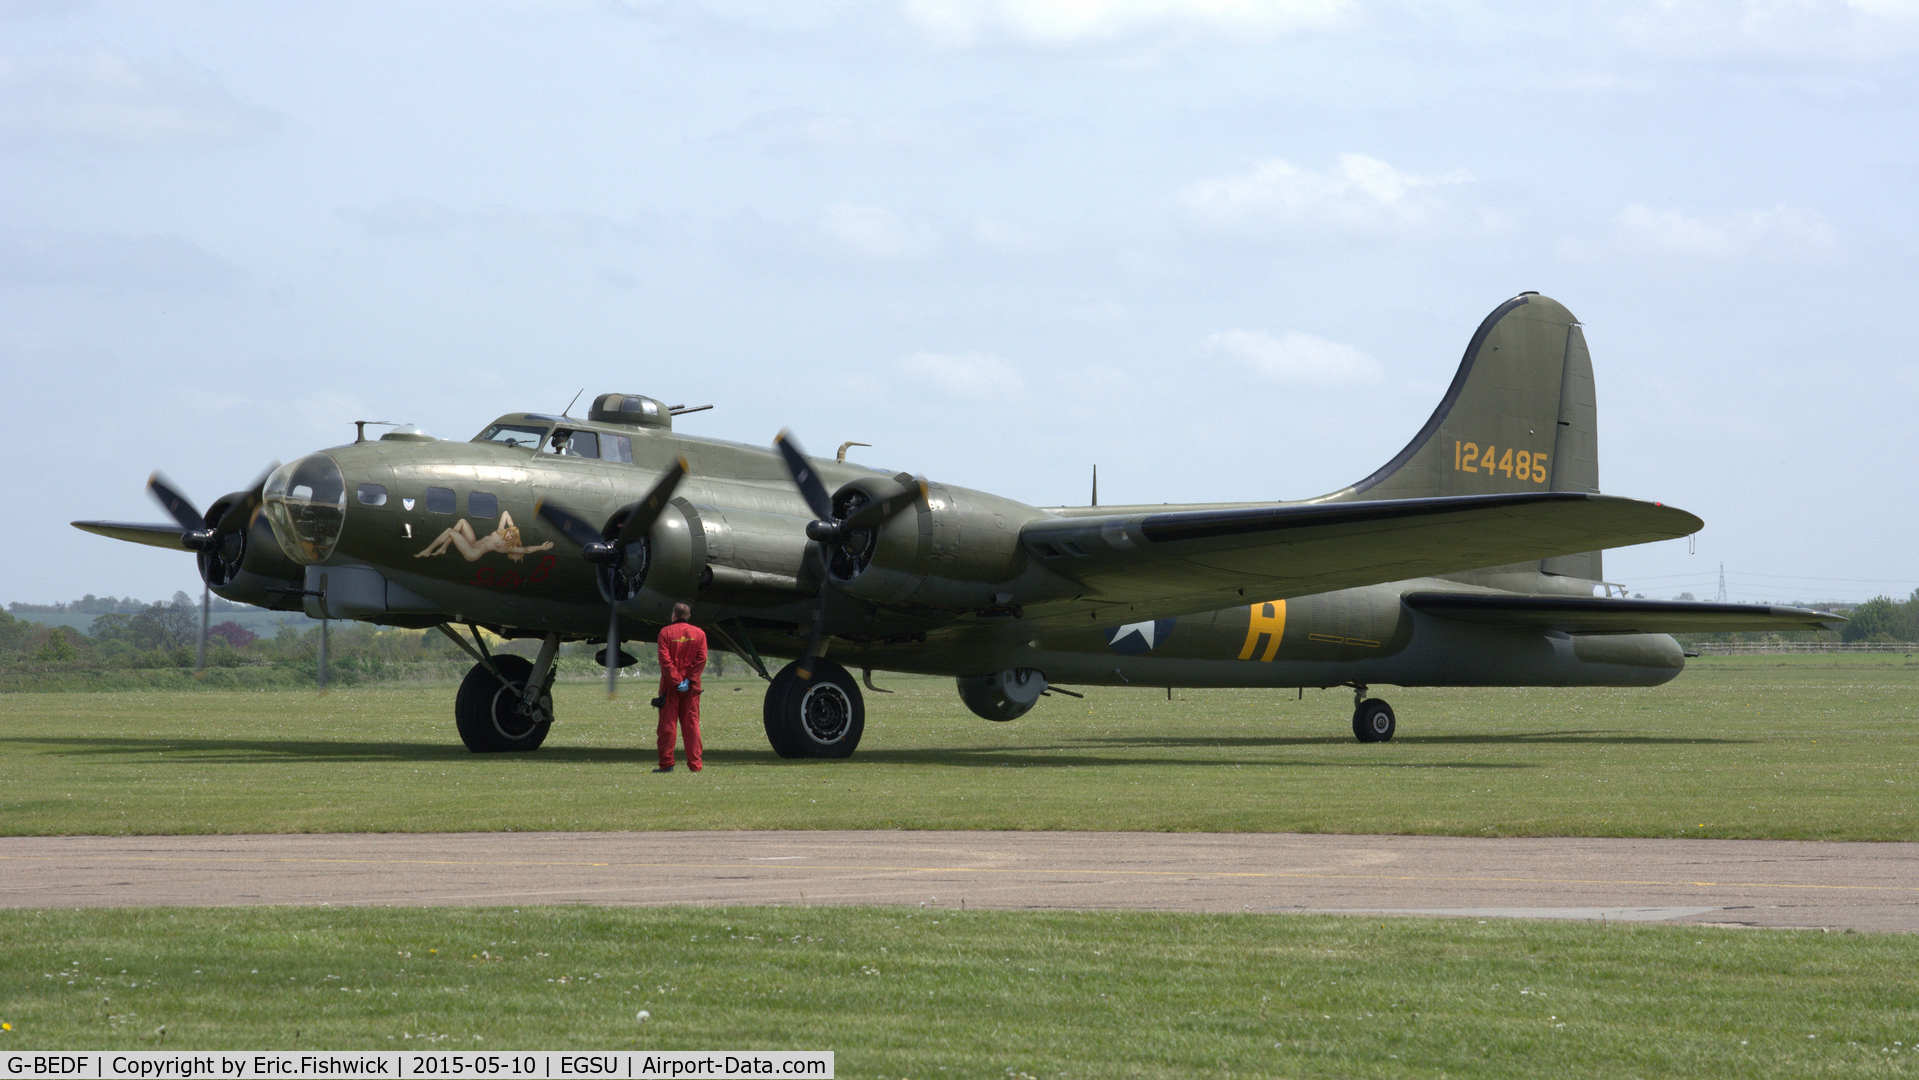 G-BEDF, 1944 Boeing B-17G Flying Fortress C/N 8693, 2. G-BEDF during engine run-up at Duxford Airfield.